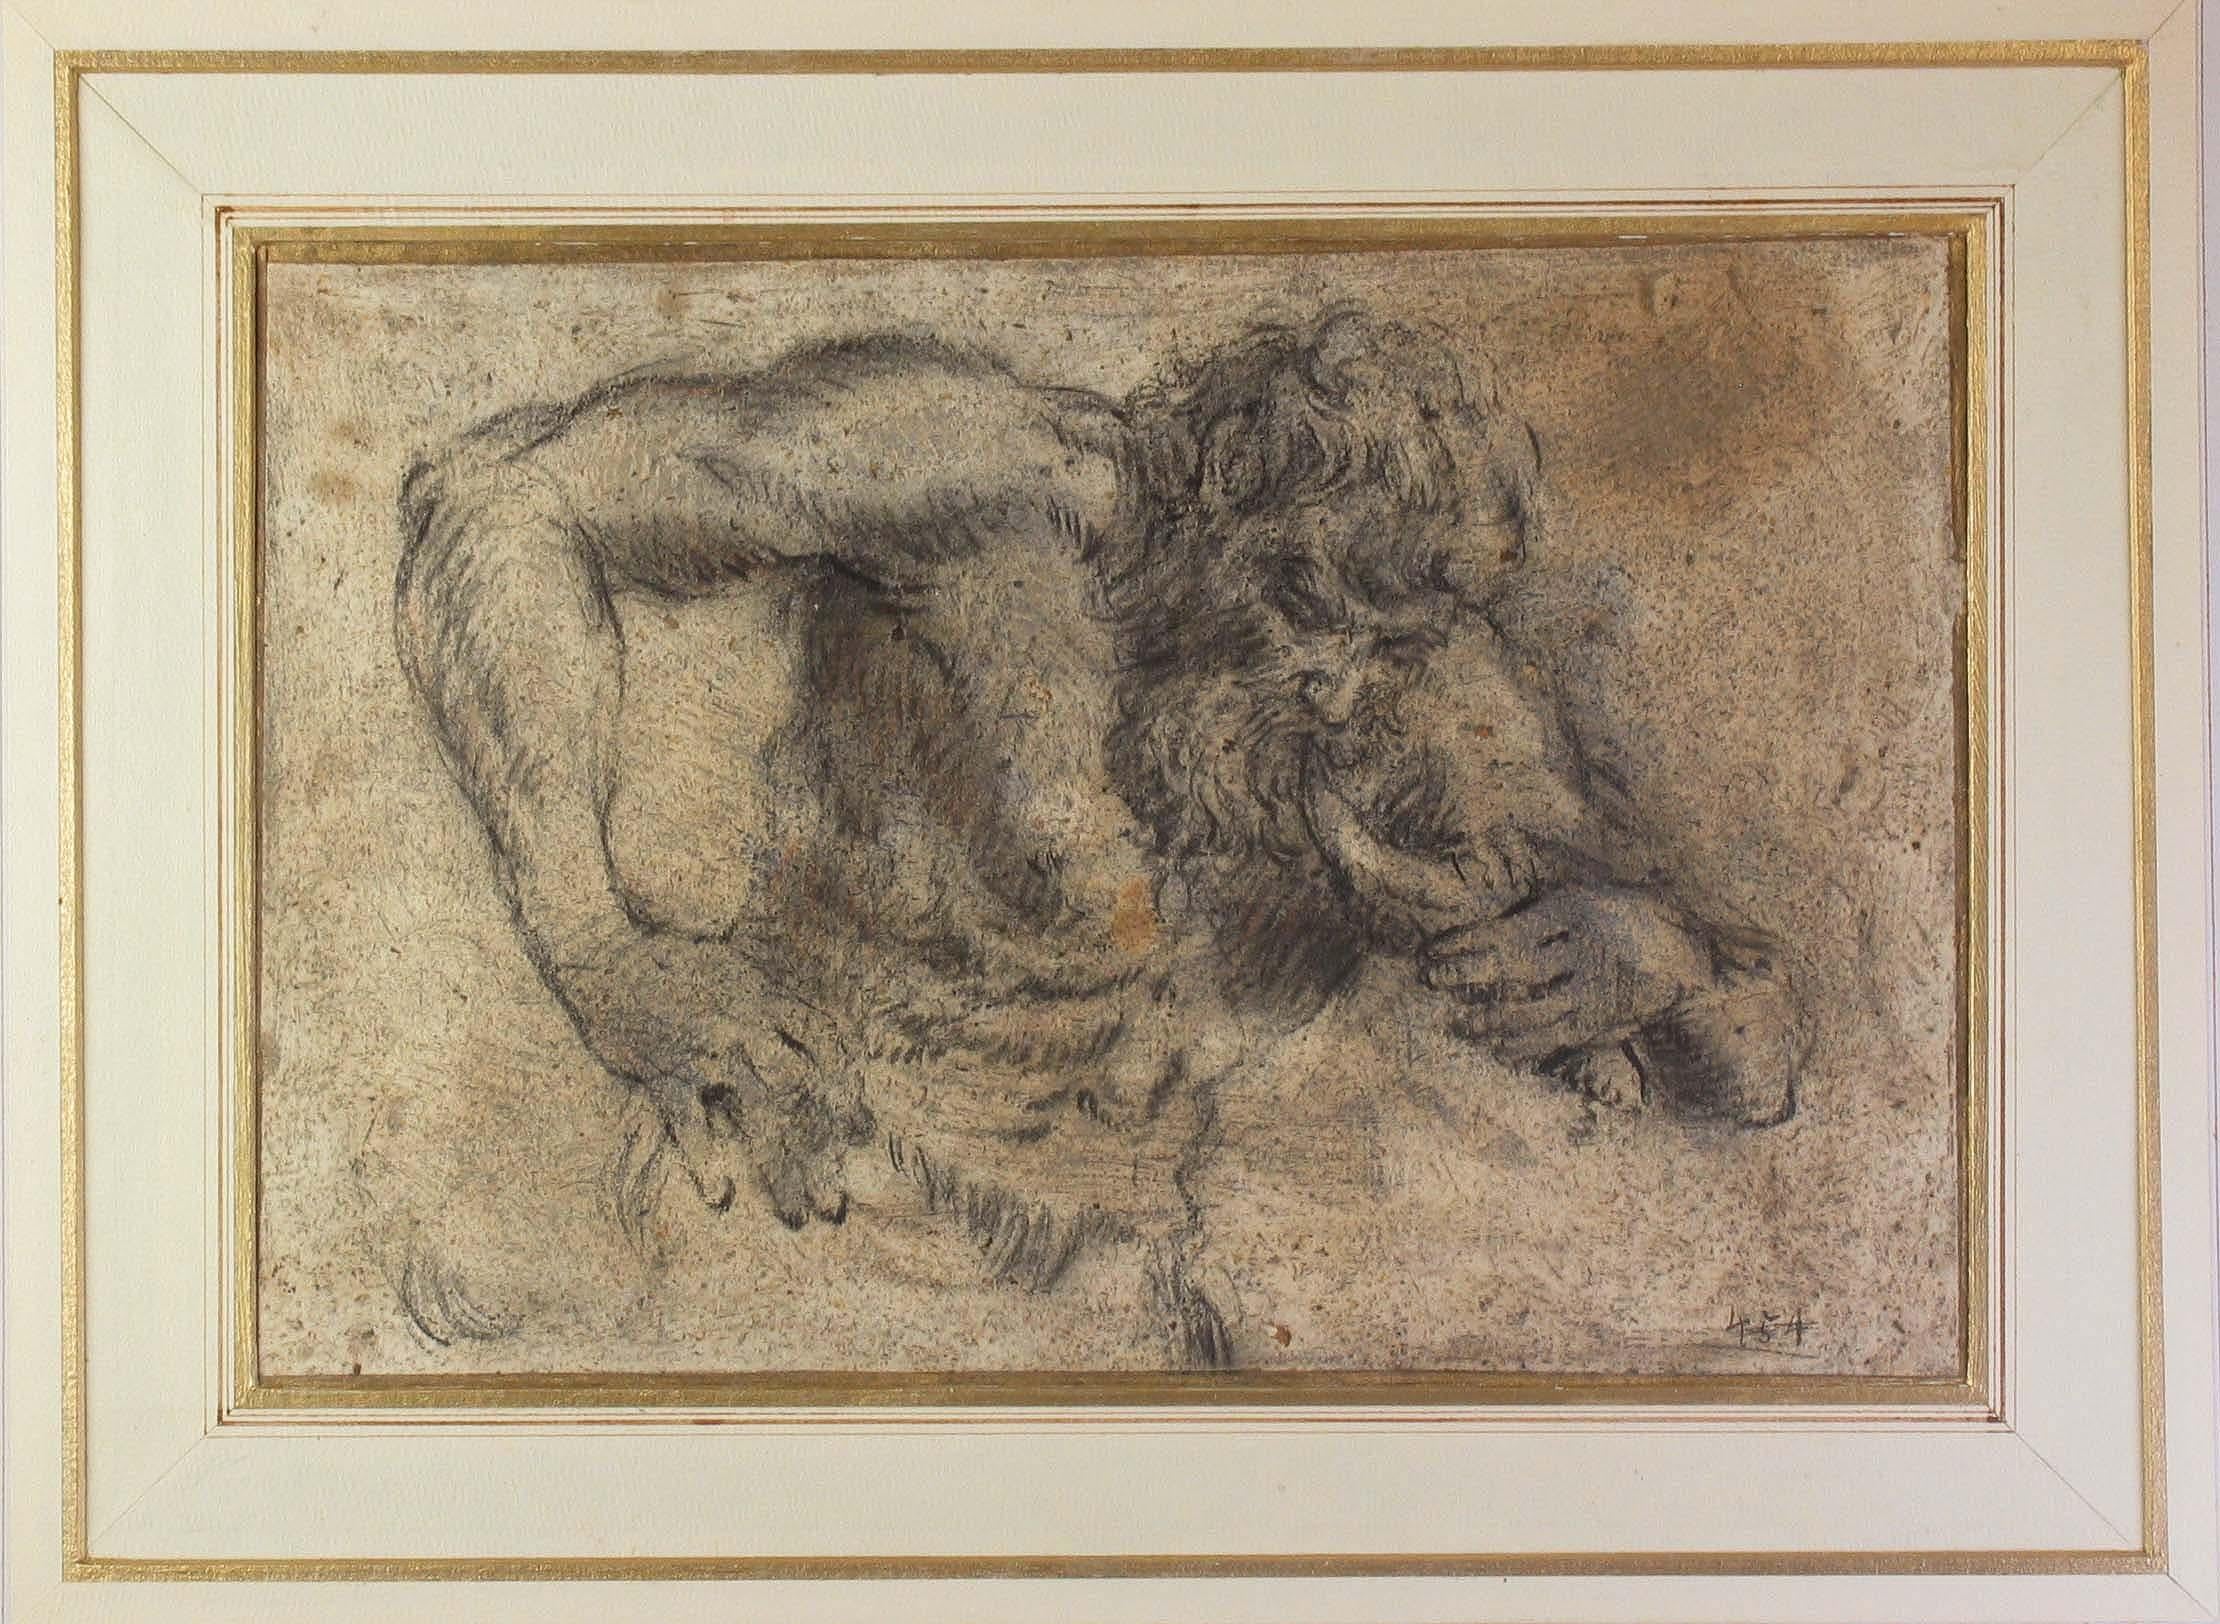 Paper Old Master Drawing Manner of Sir Peter Paul Rubens, 18th Century or Earlier